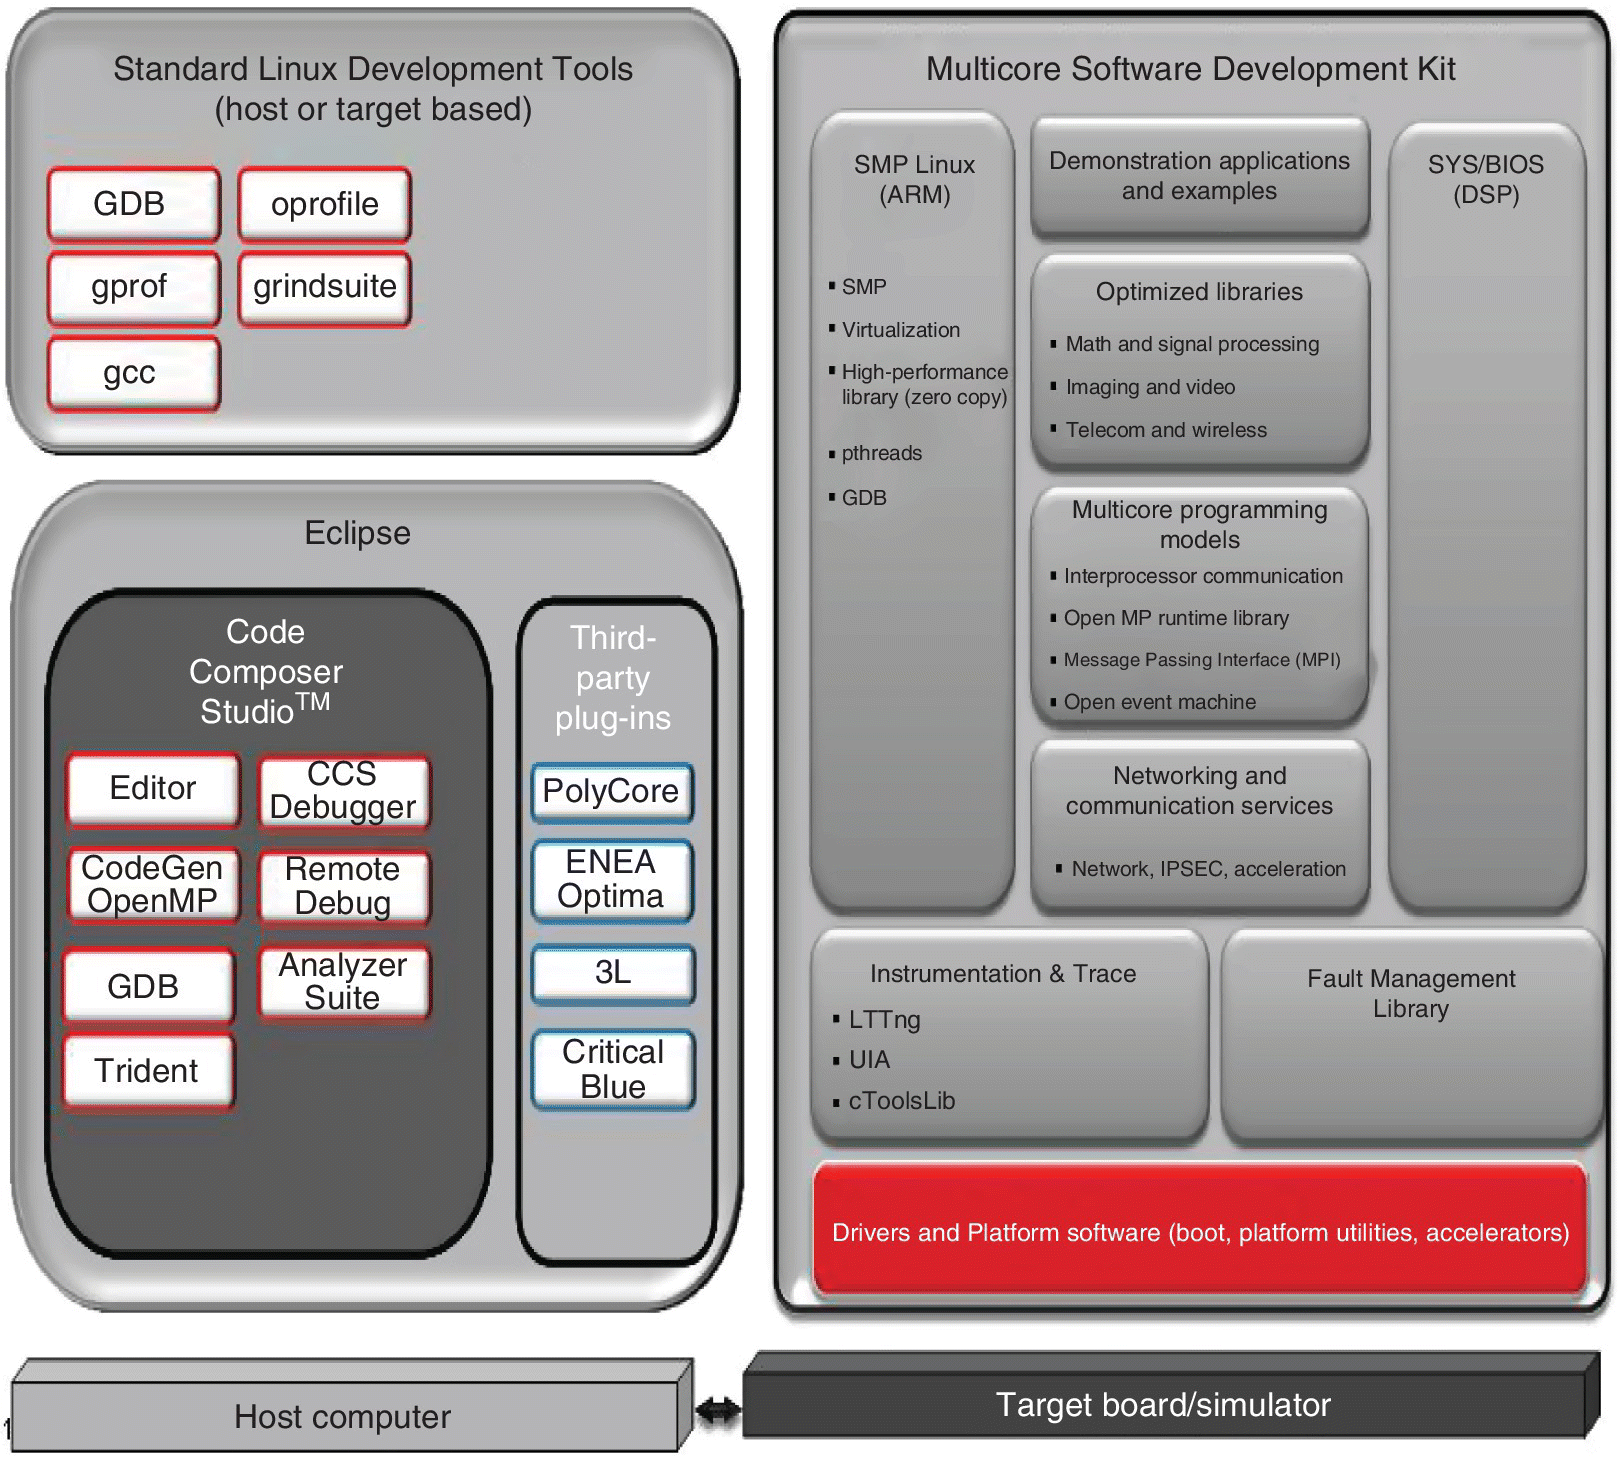 Diagram of Texas instruments’ software ecosystem illustrating the standard Linux development tools, multicore software development kit, eclipse, host computer, and target board/simulator.